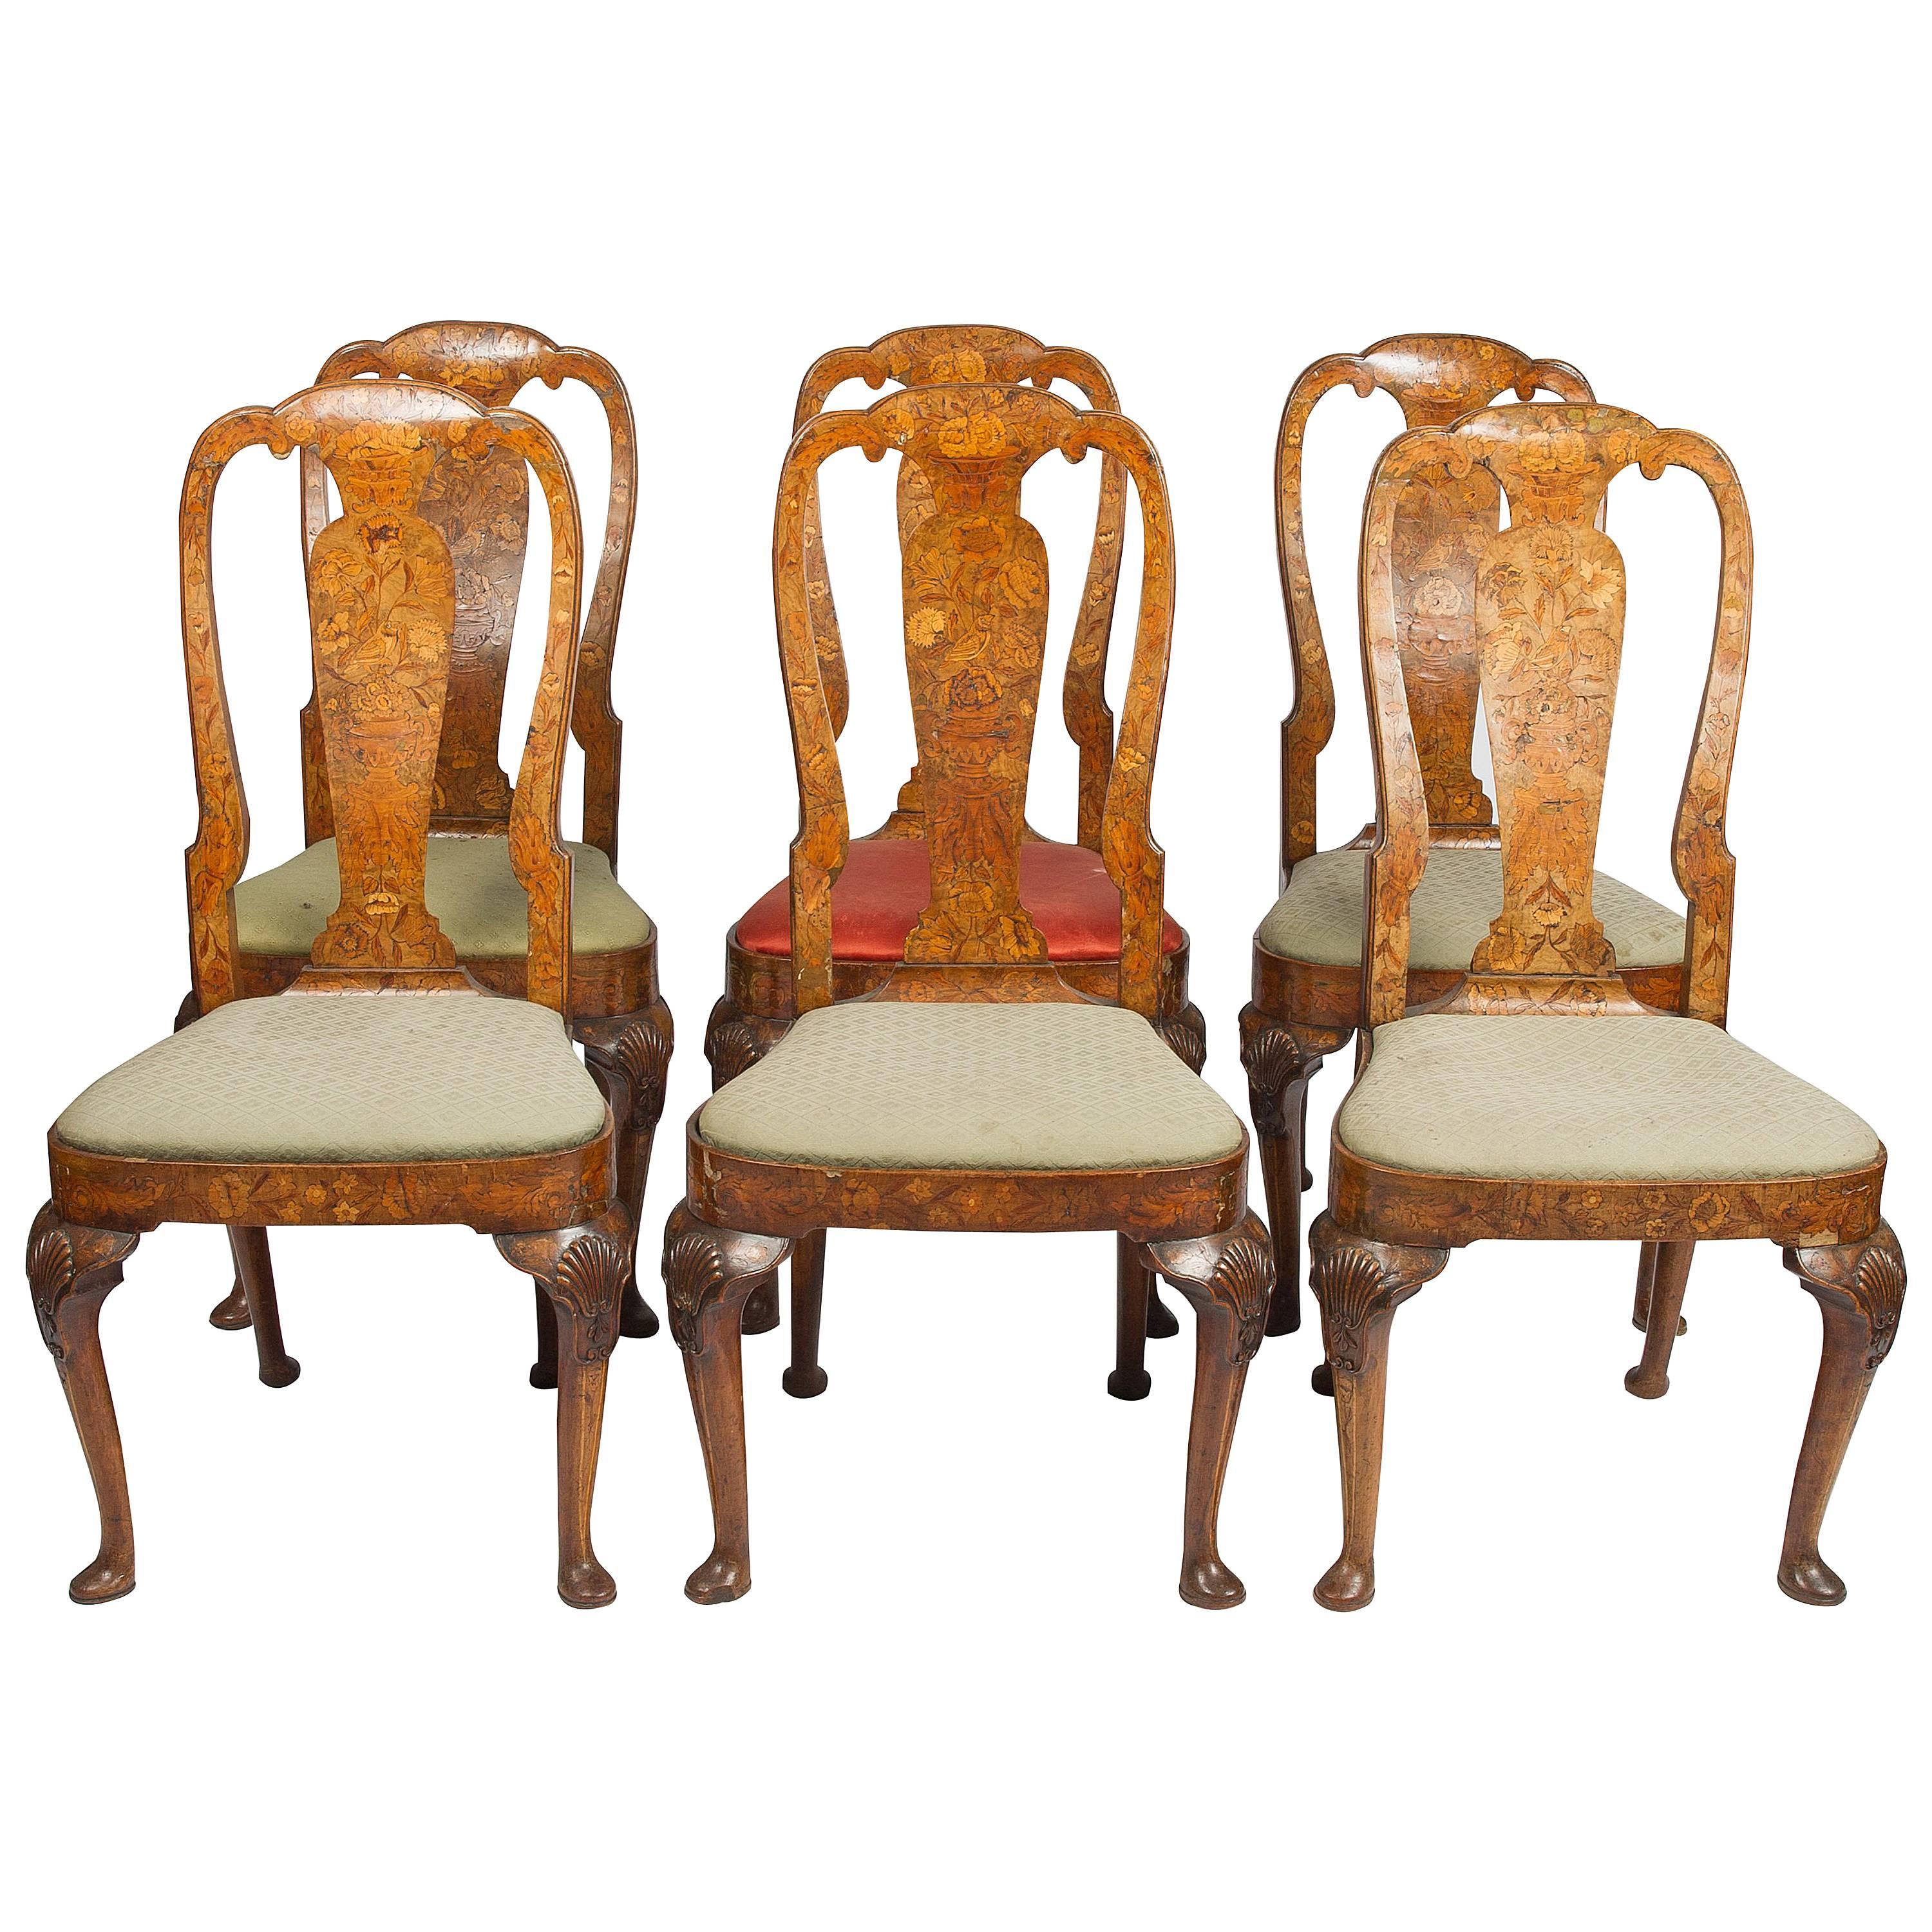 Set of Six 18th Century Dutch Marquetry Chairs